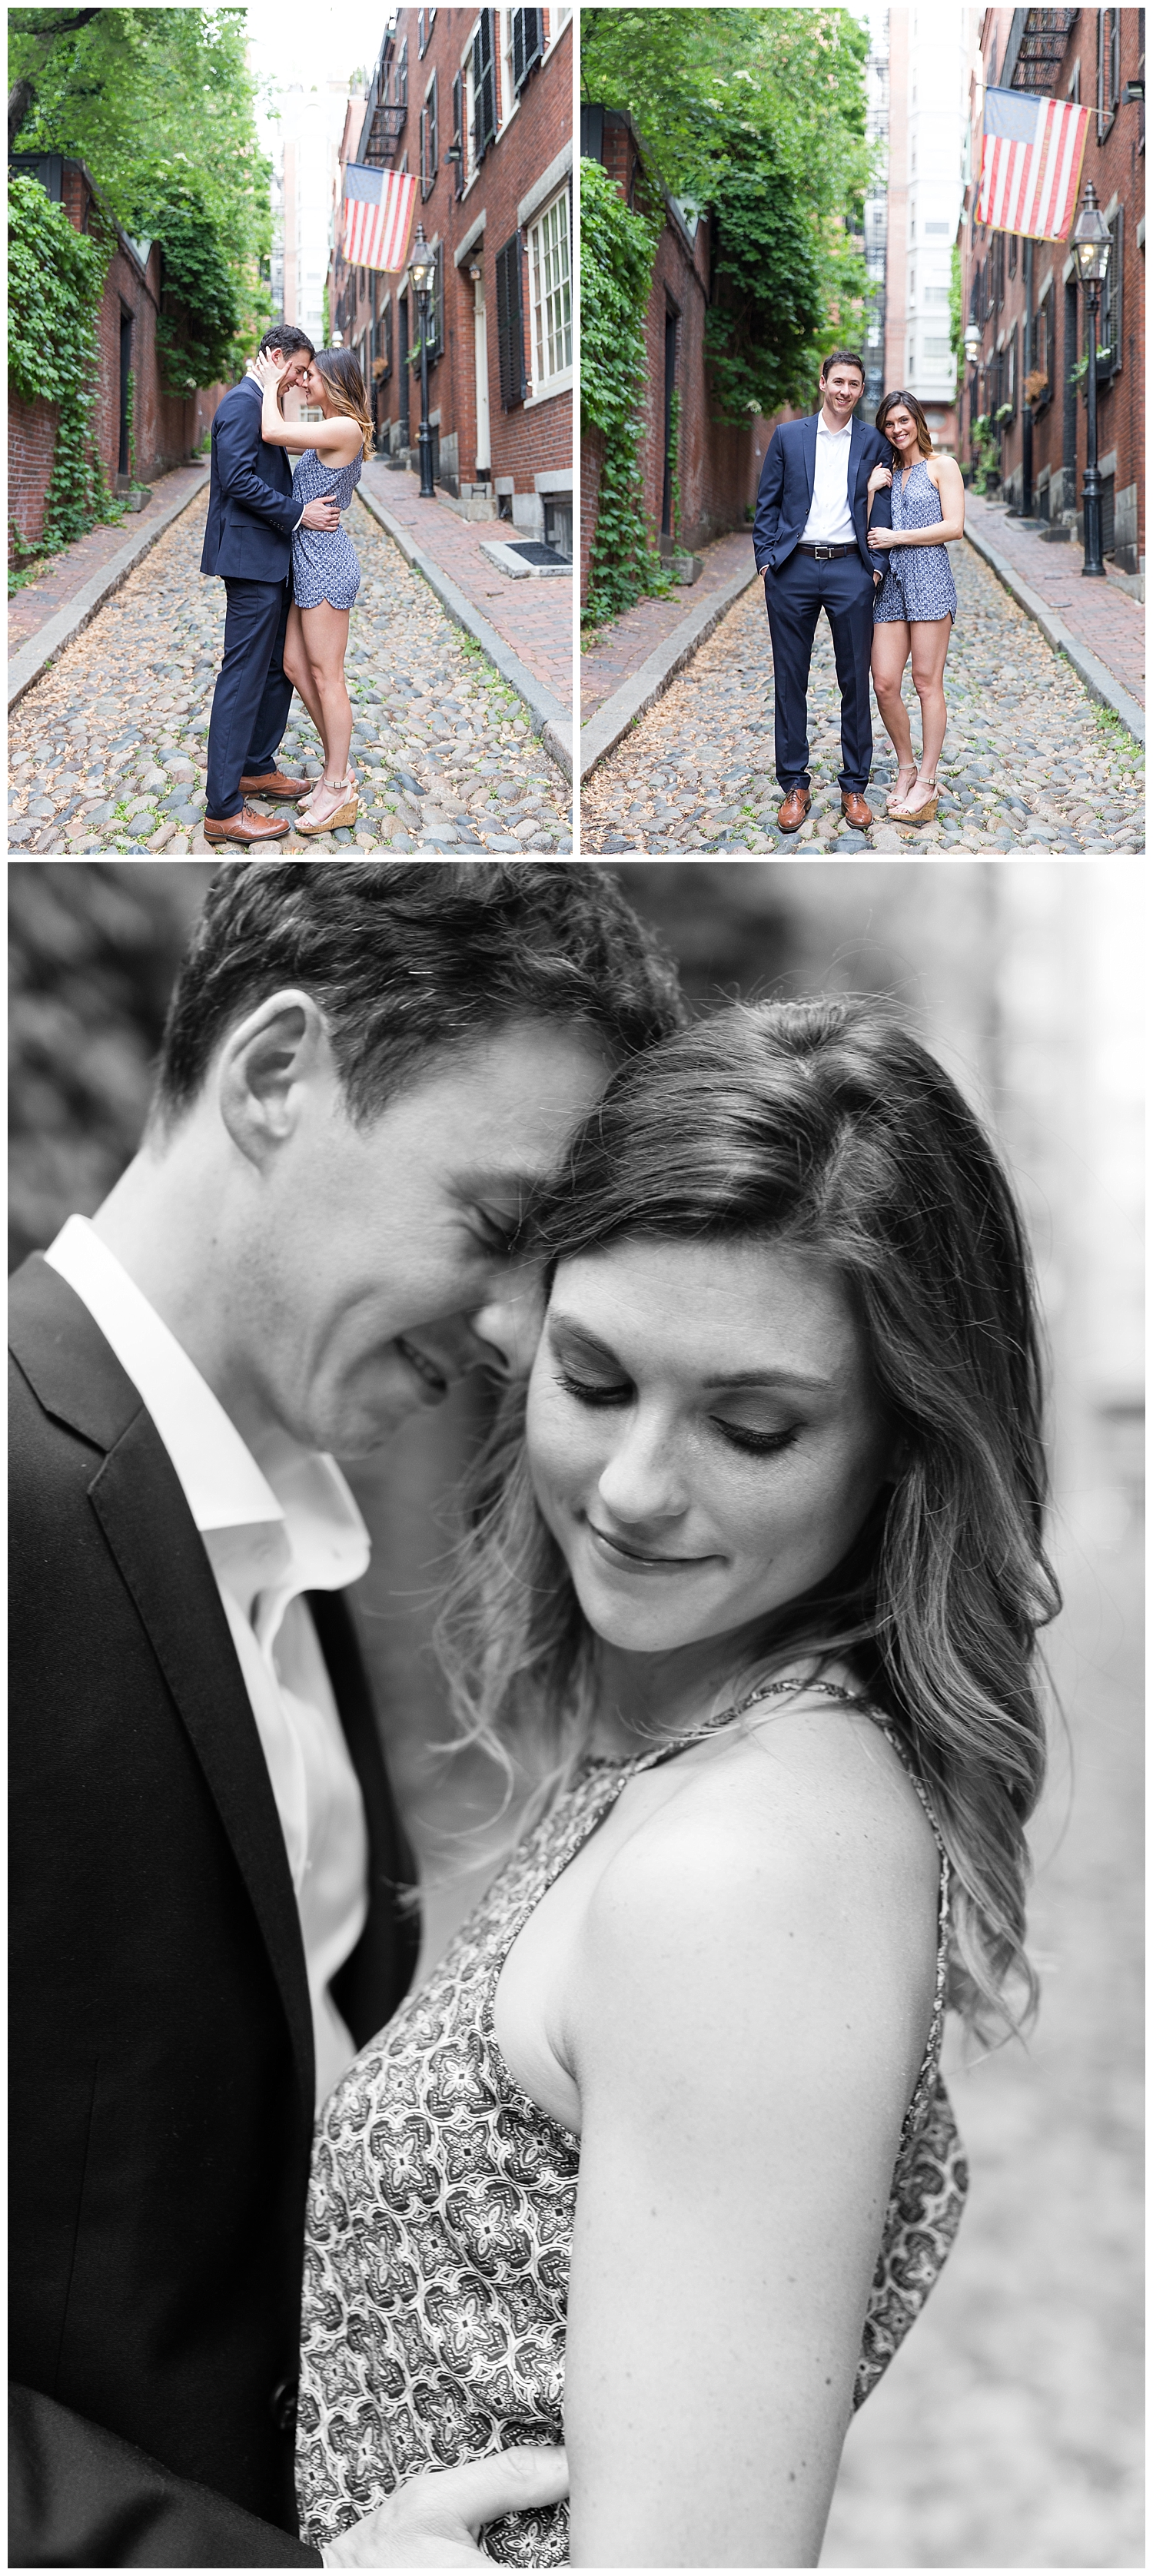 Beacon Hill Boston Engagement Session with photography by Halie Olszowy.